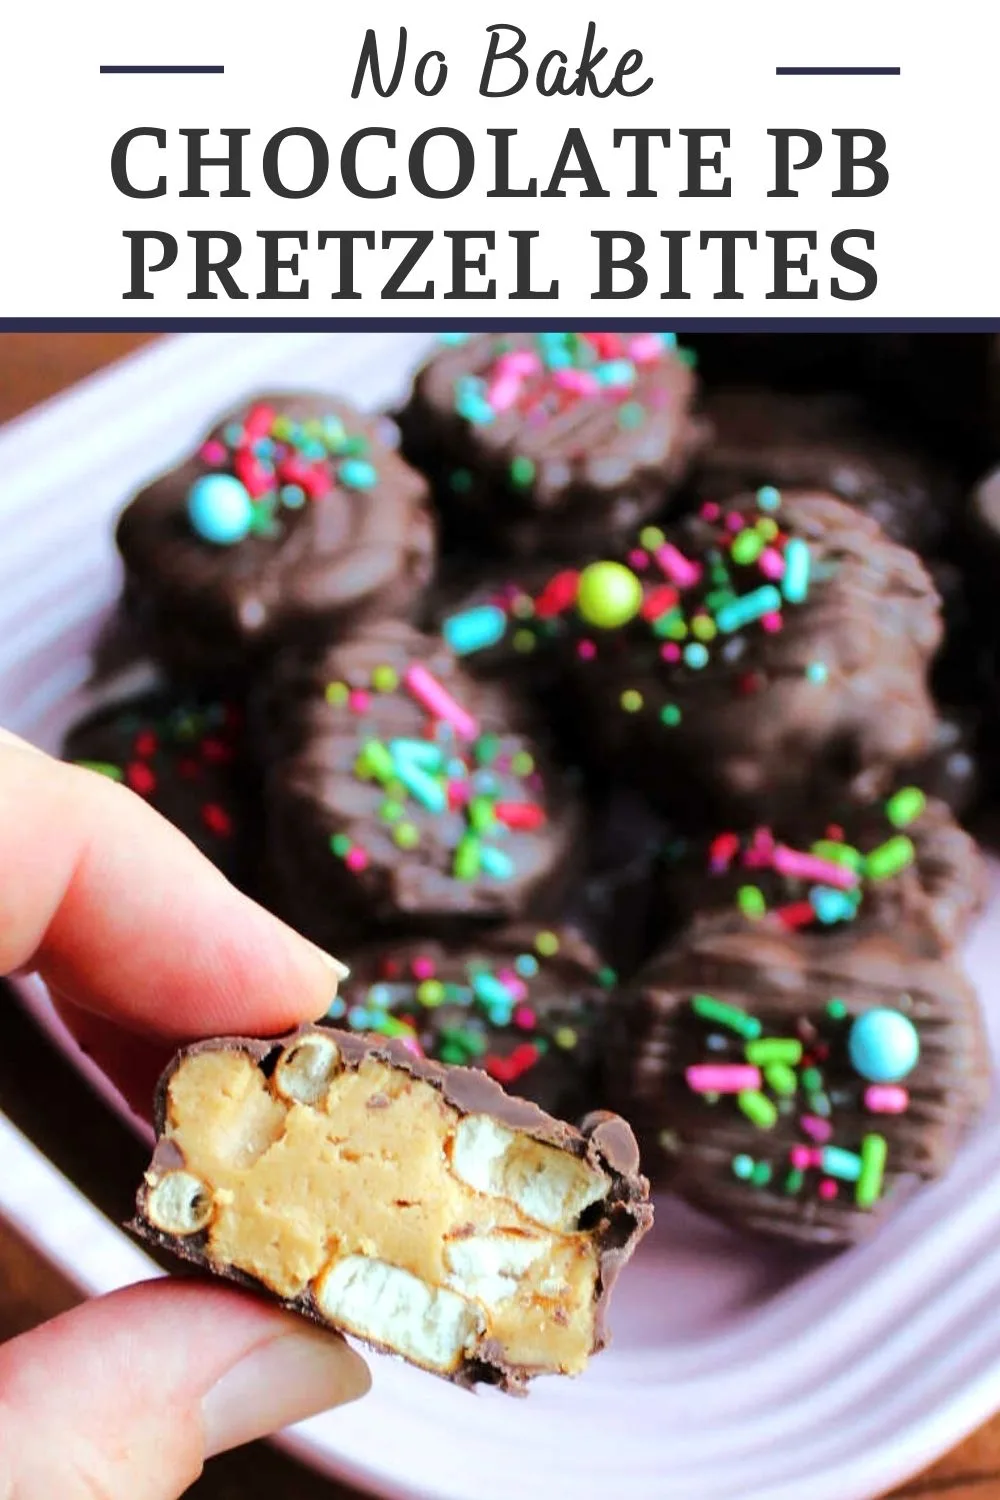 Chocolate peanut butter pretzel bites have salty crunchy pretzels, a soft creamy peanut butter center and hard chocolate shell. It is the perfect mix of chocolate covered pretzels and buckeyes!